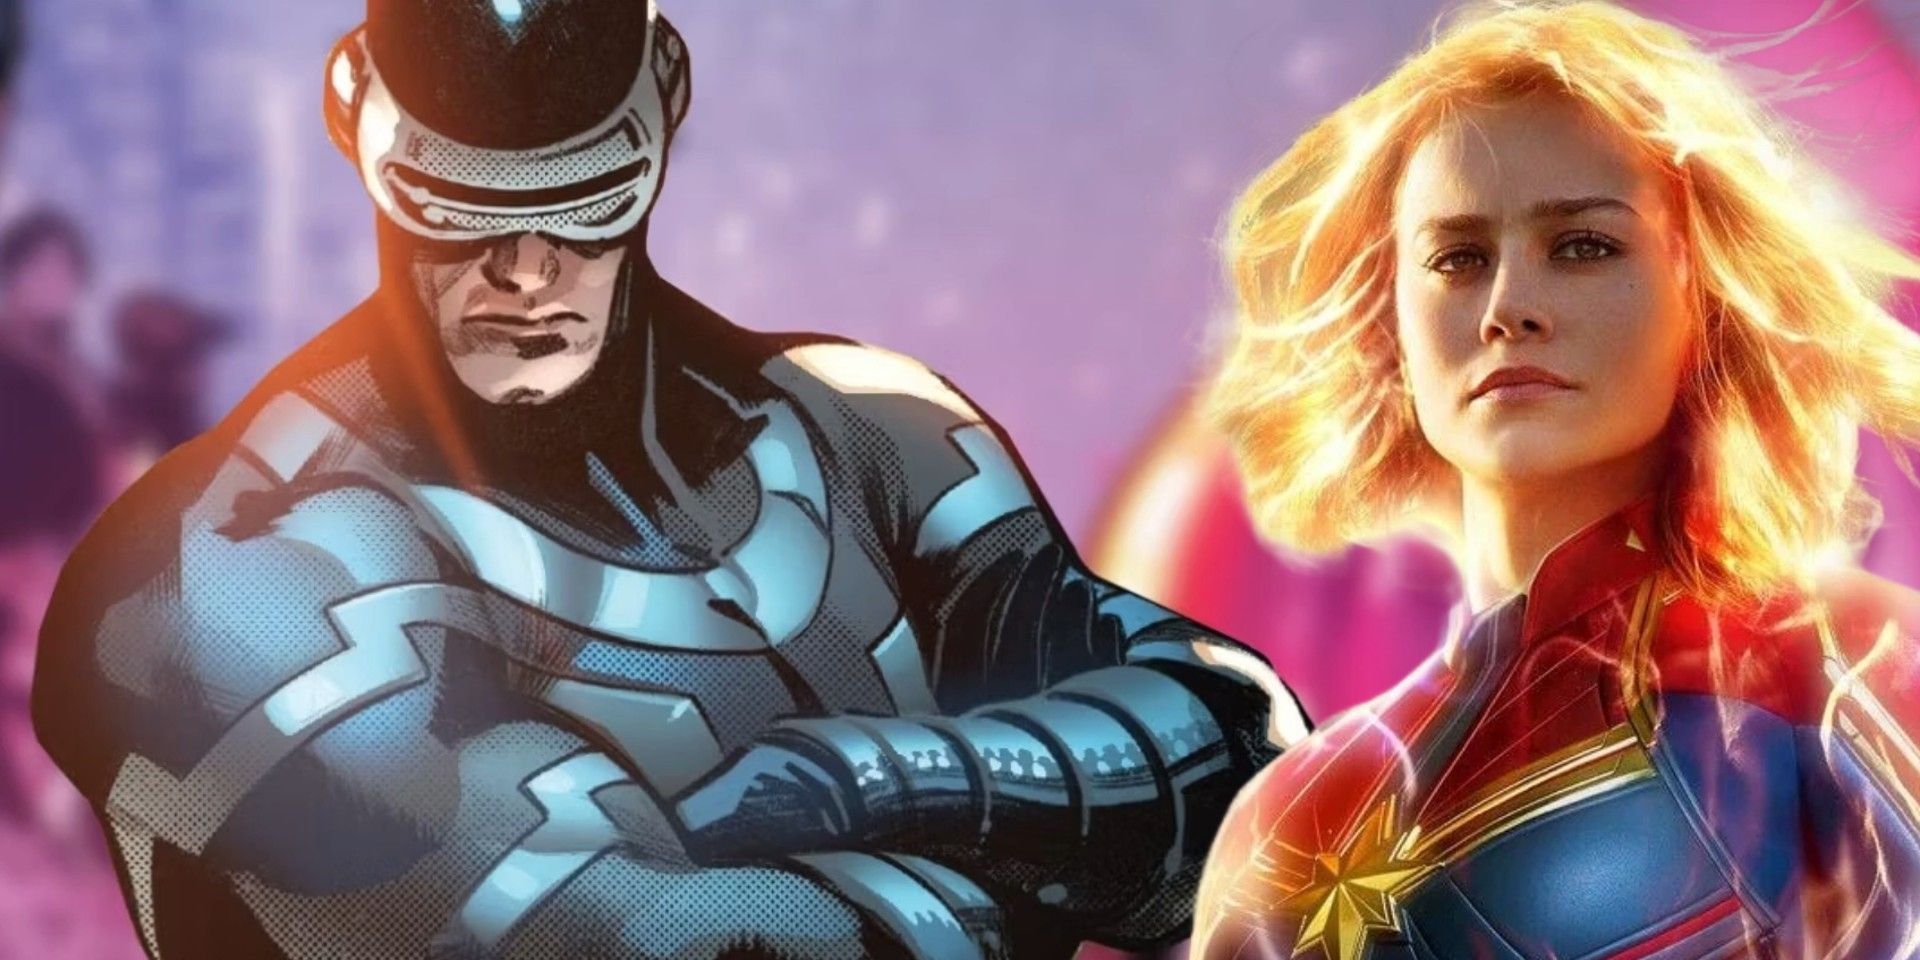 The Avengers’ & X-Men’s Leaders Are Different in 1 Key Way